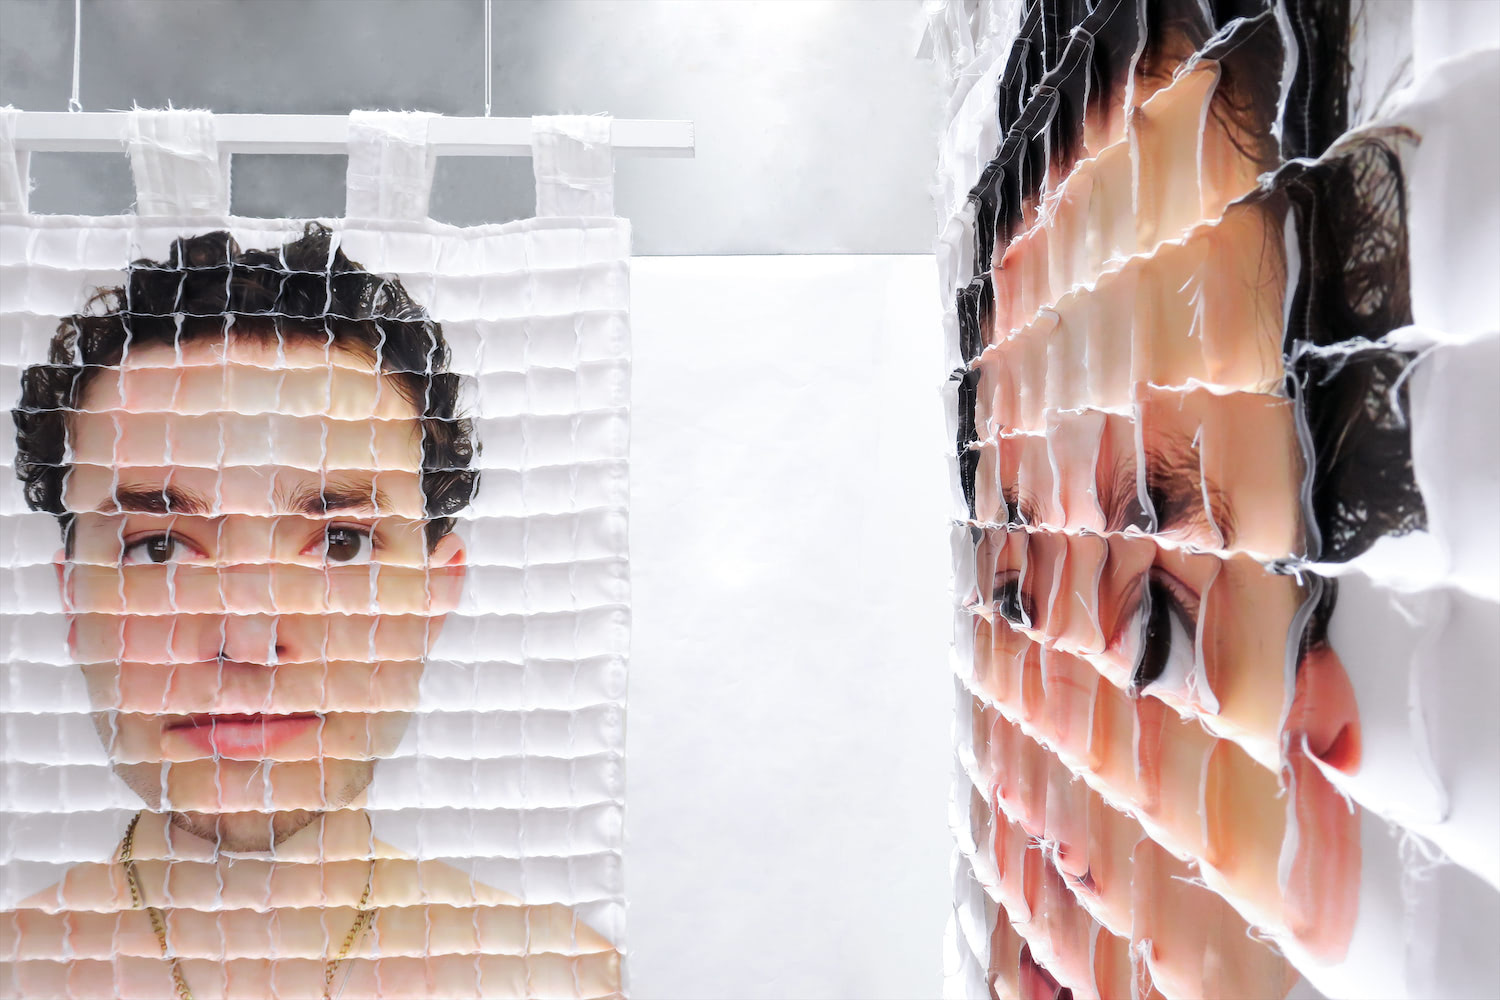 Two quilts are shown, both with the artist's face. Facing directly forward, the right side of the artist's face is visible. To the right, a close up view of a quilt is visible. The severe angle of the quilt emphasizes the gridded seams that cover the quilt.